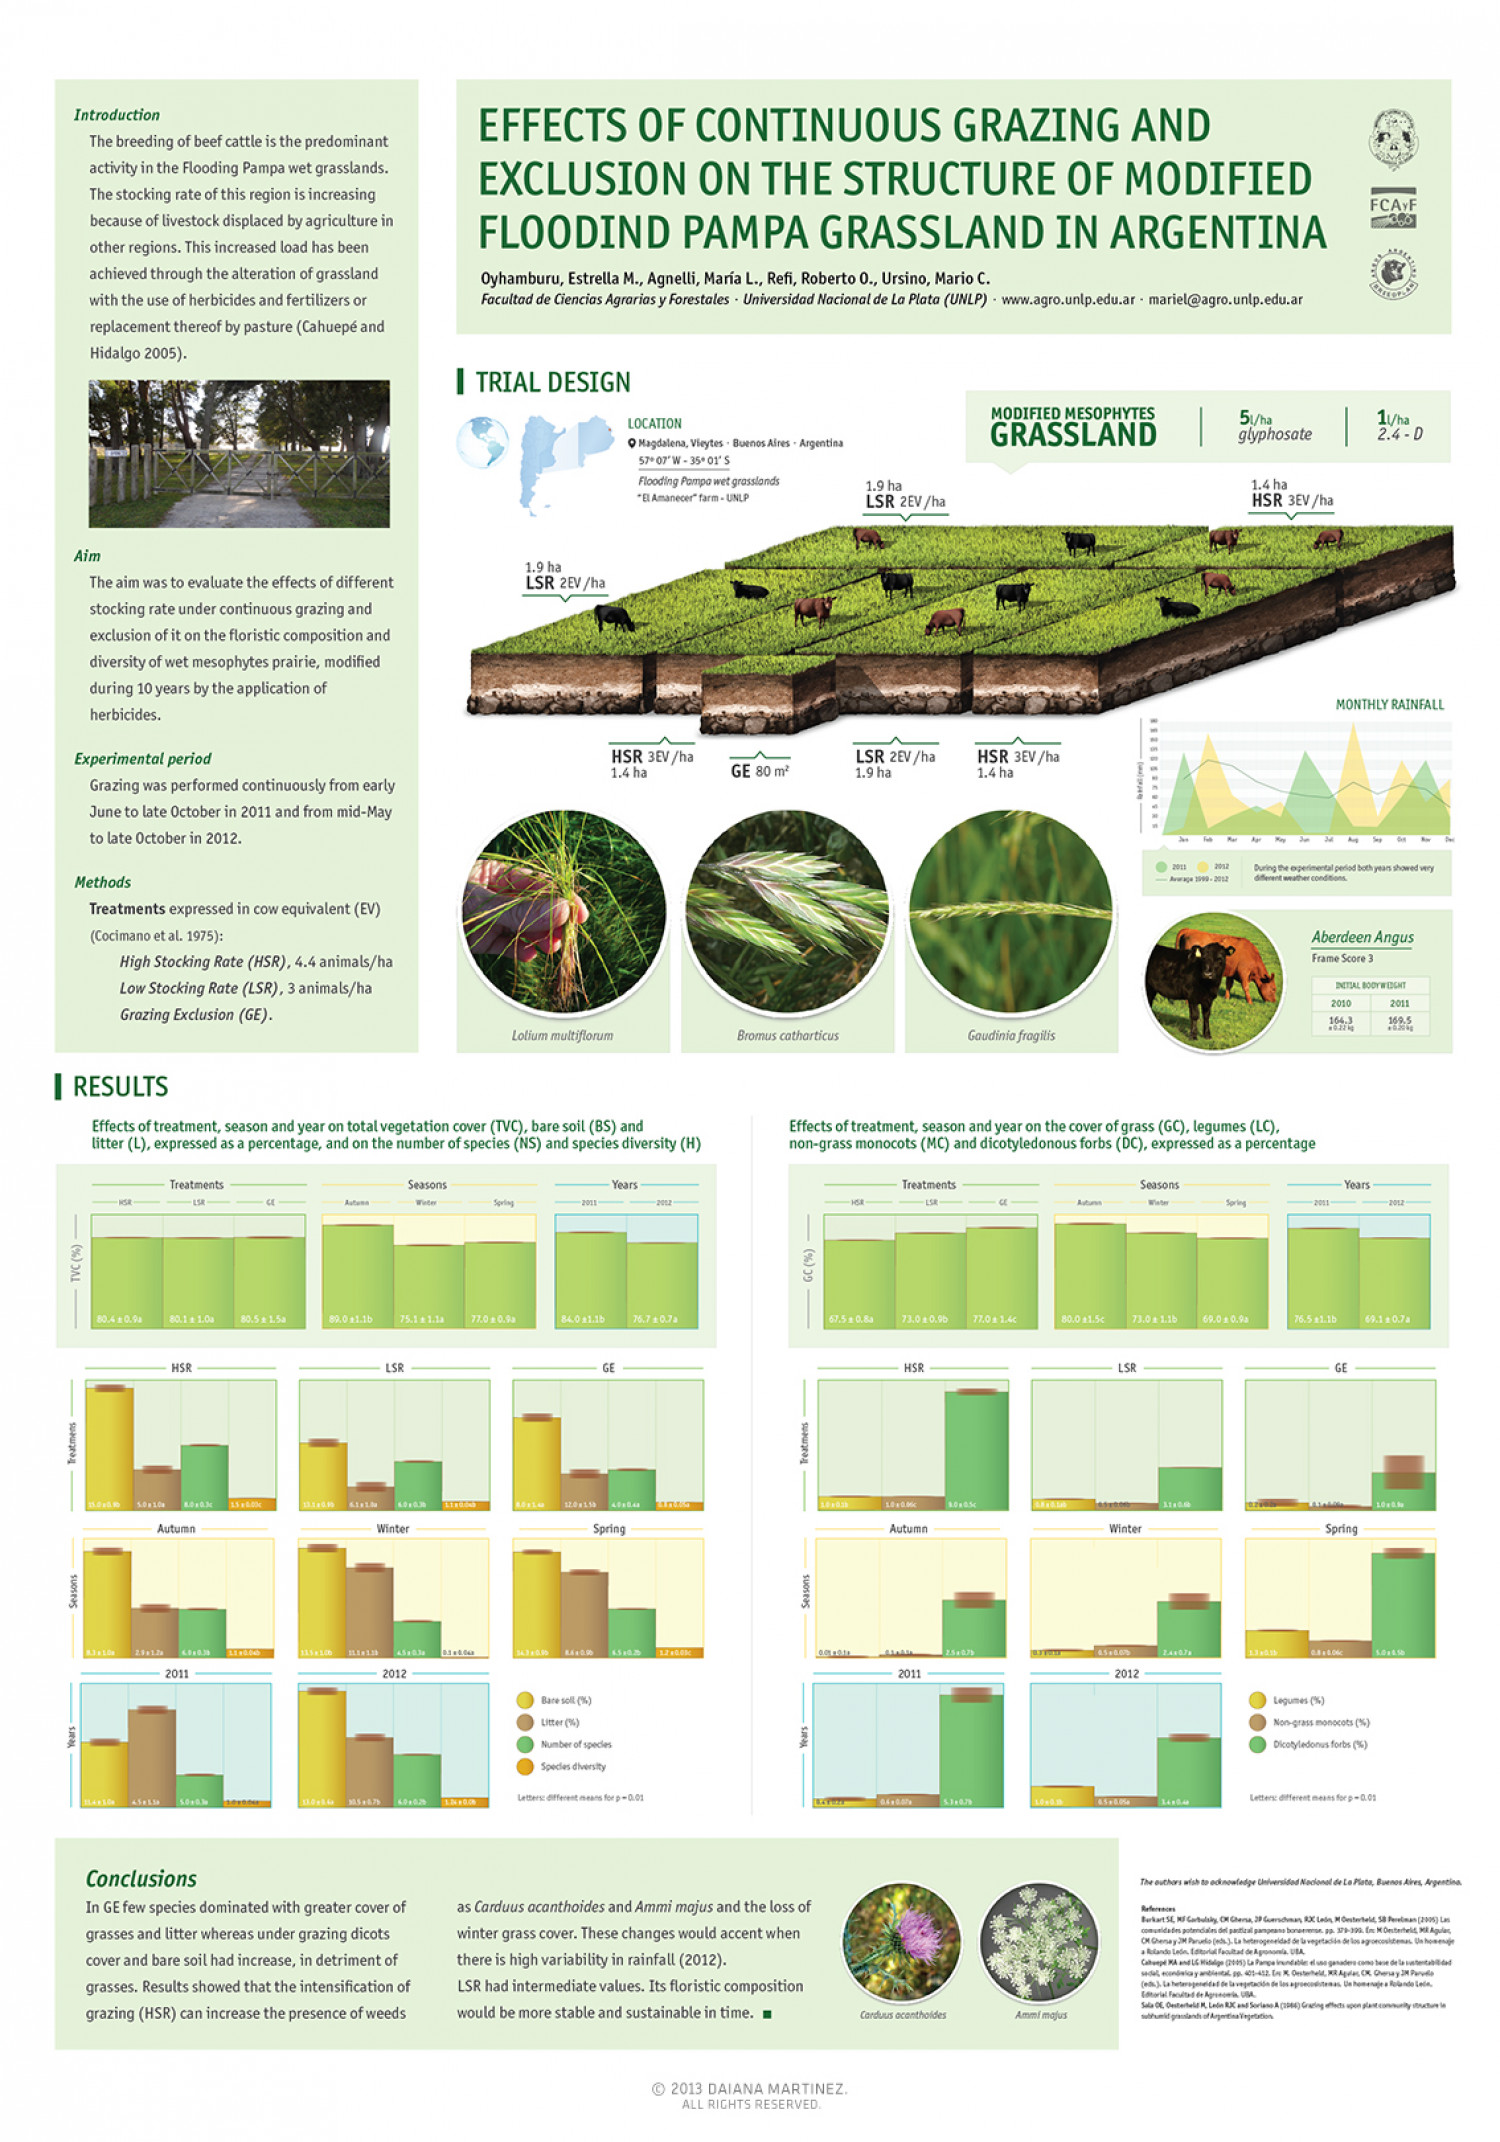 Effects of continuous grazing on grassland structure Infographic